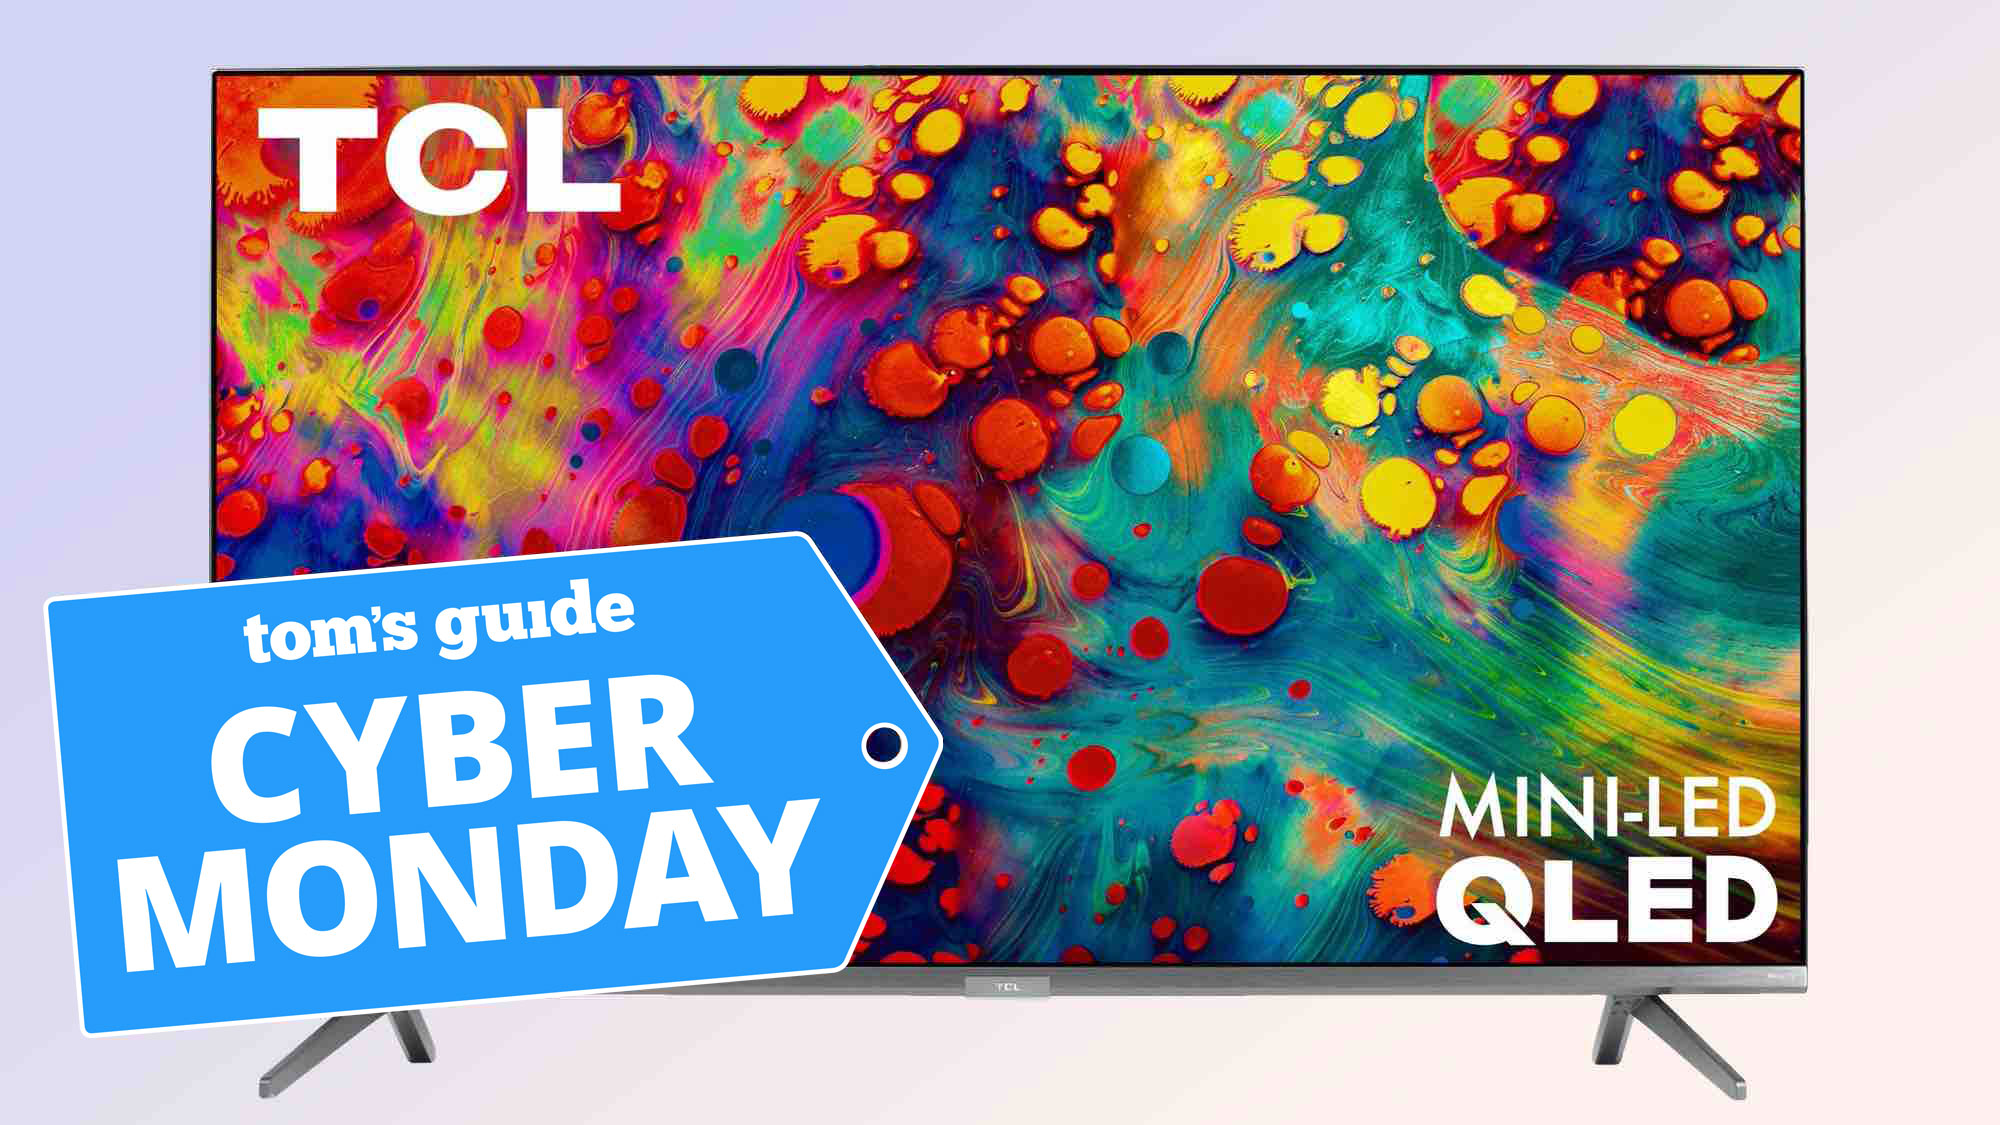 TCL 65-Inch 4K QLED Roku TV Cyber Monday Badge